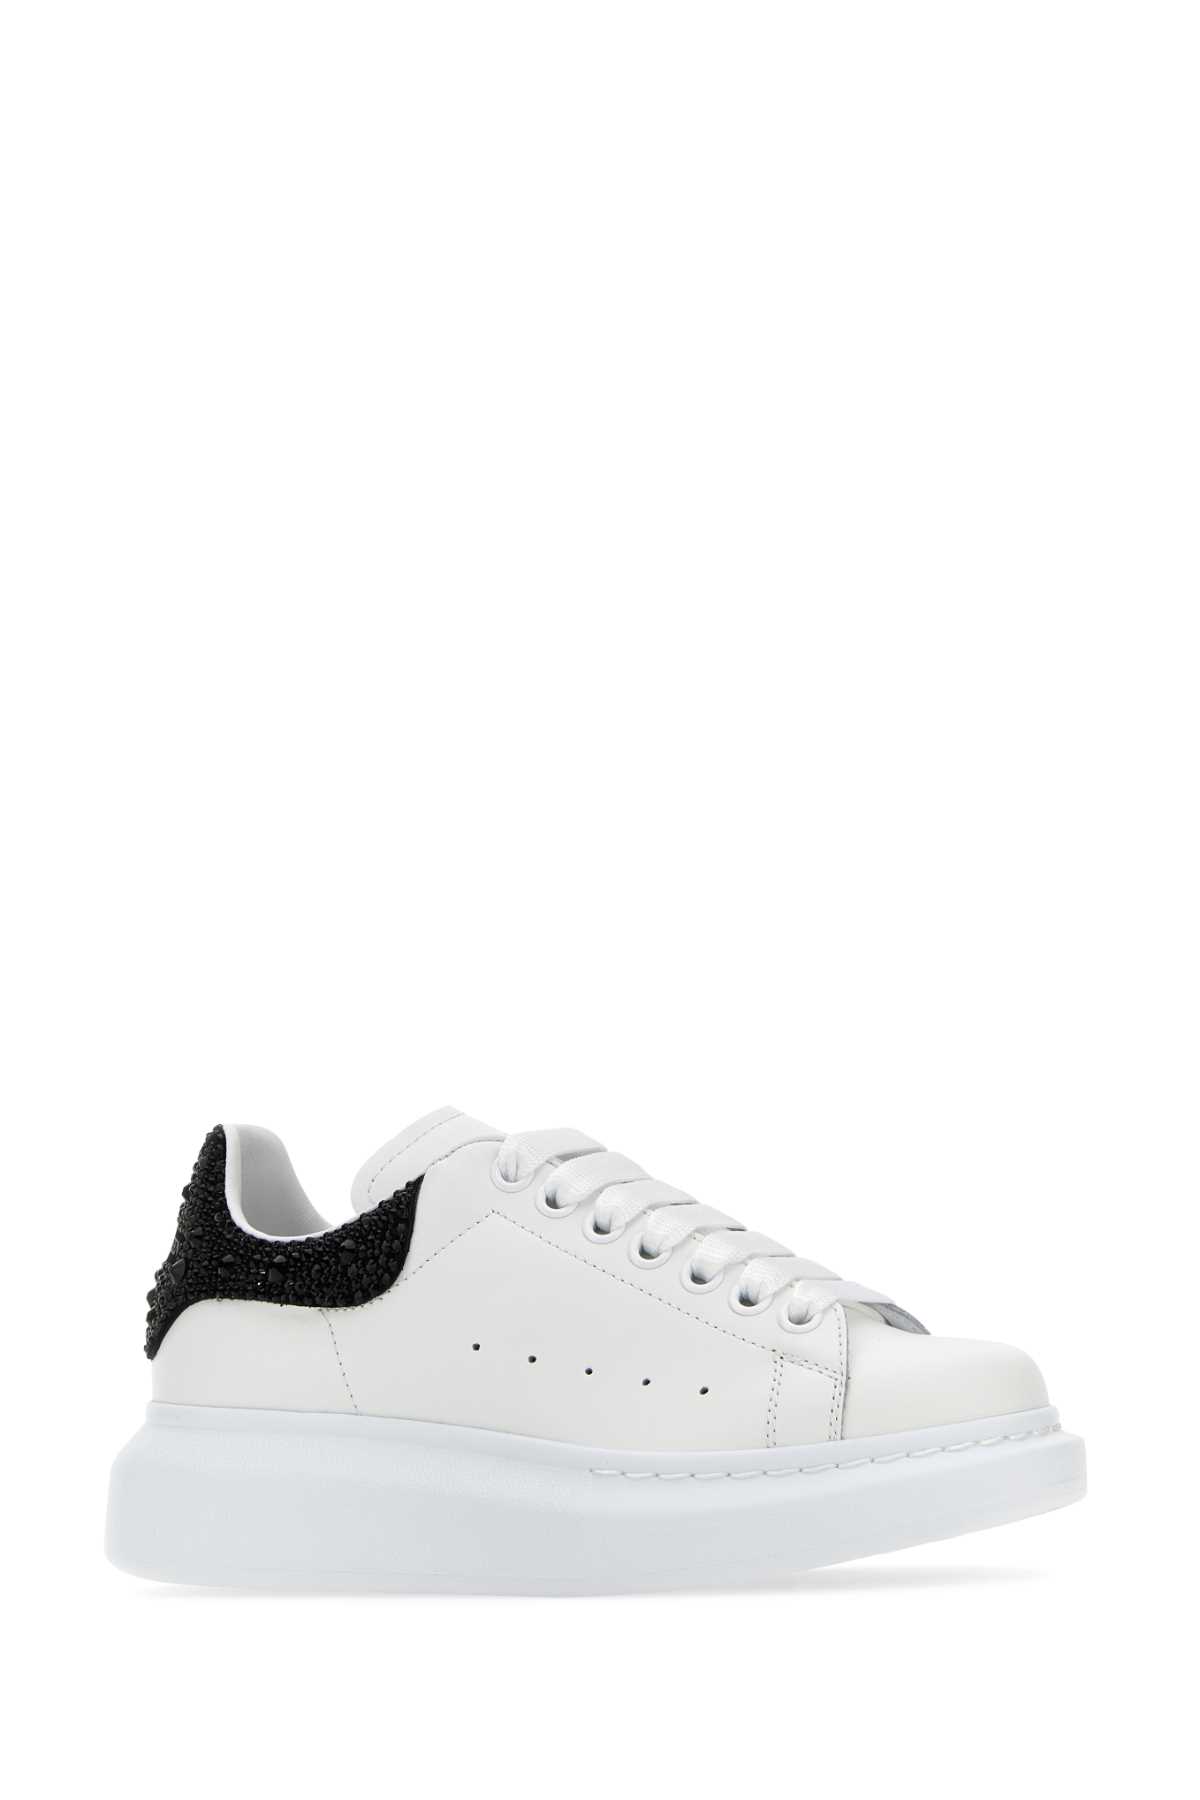 ALEXANDER MCQUEEN WHITE LEATHER SNEAKERS WITH EMBELLISHED SUEDE HEEL